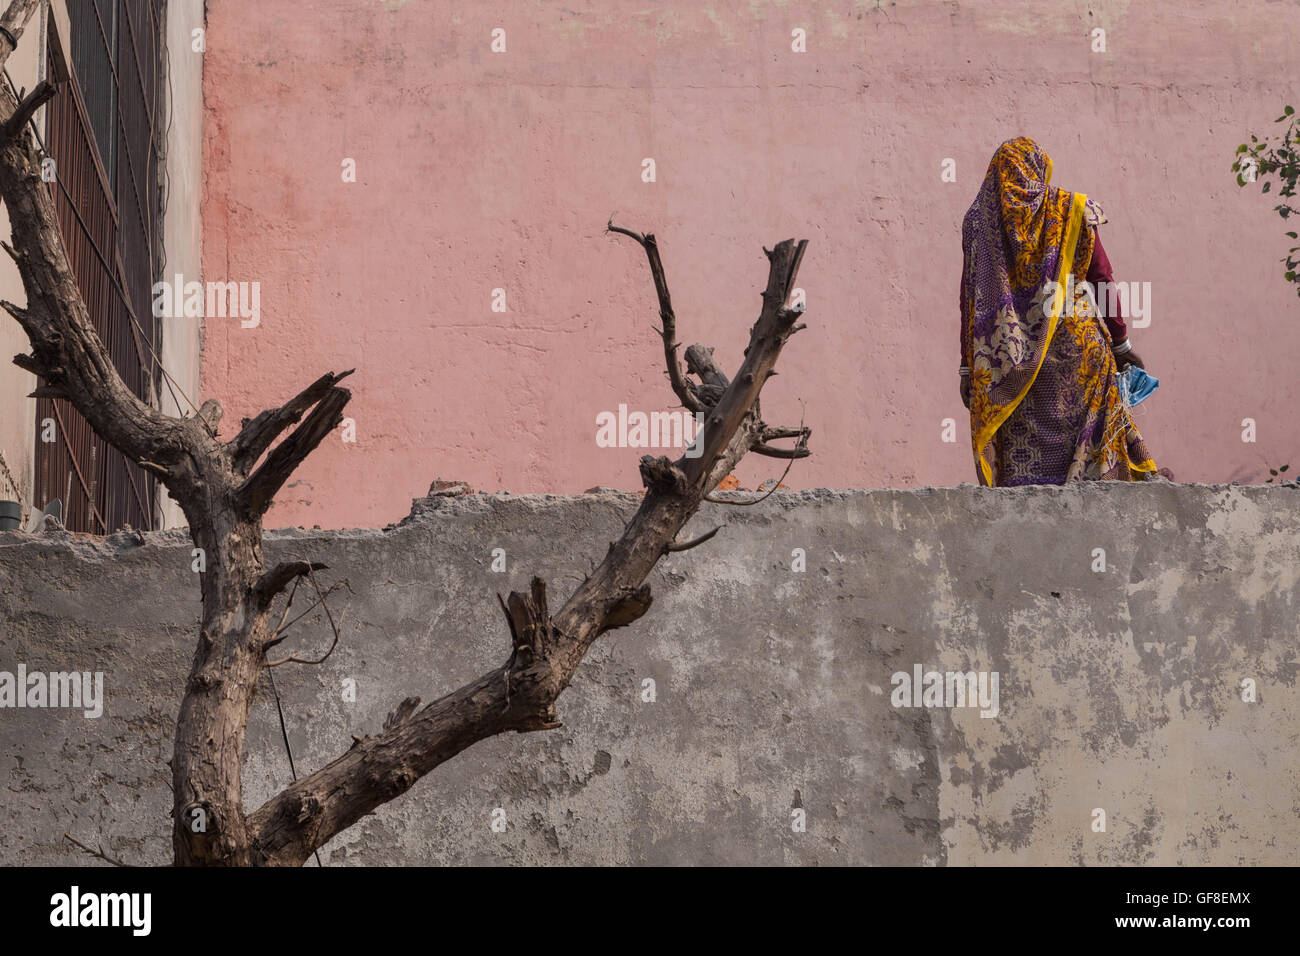 An artistic rendering of a Indian woman working on the second floor of a building in New Delhi, India. Stock Photo